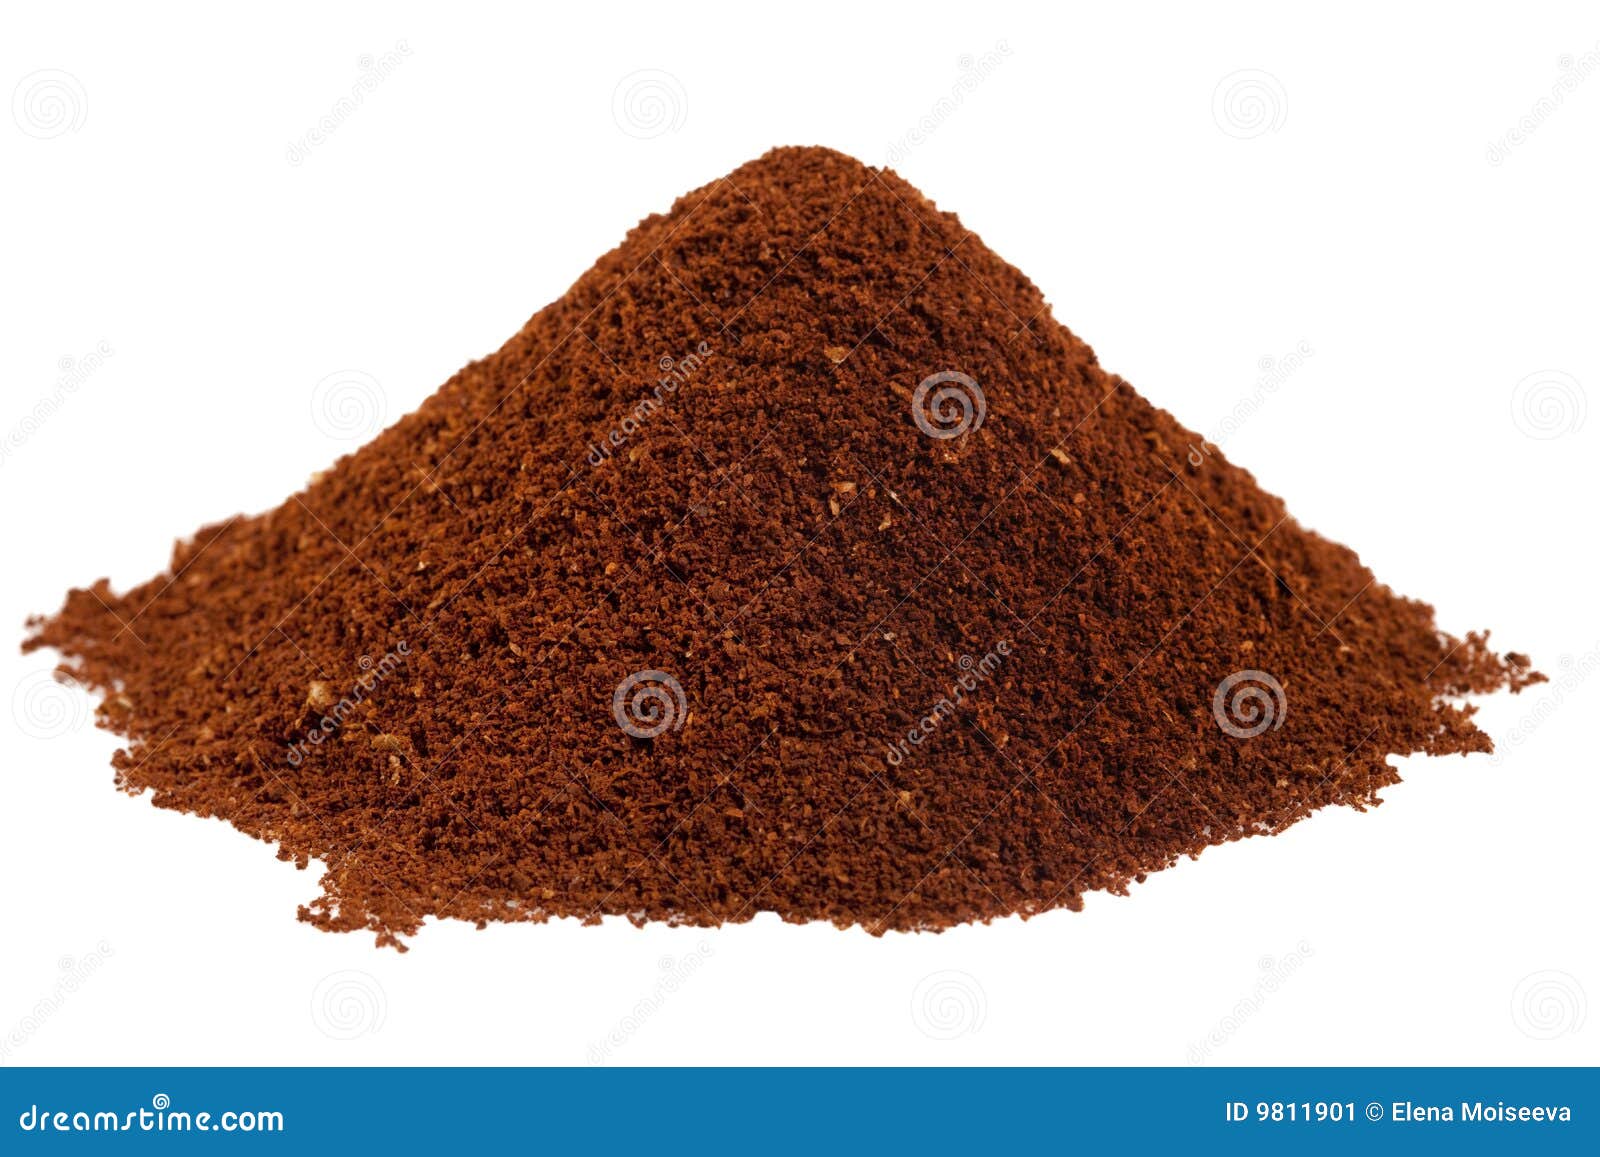 ground coffee beans in a pile